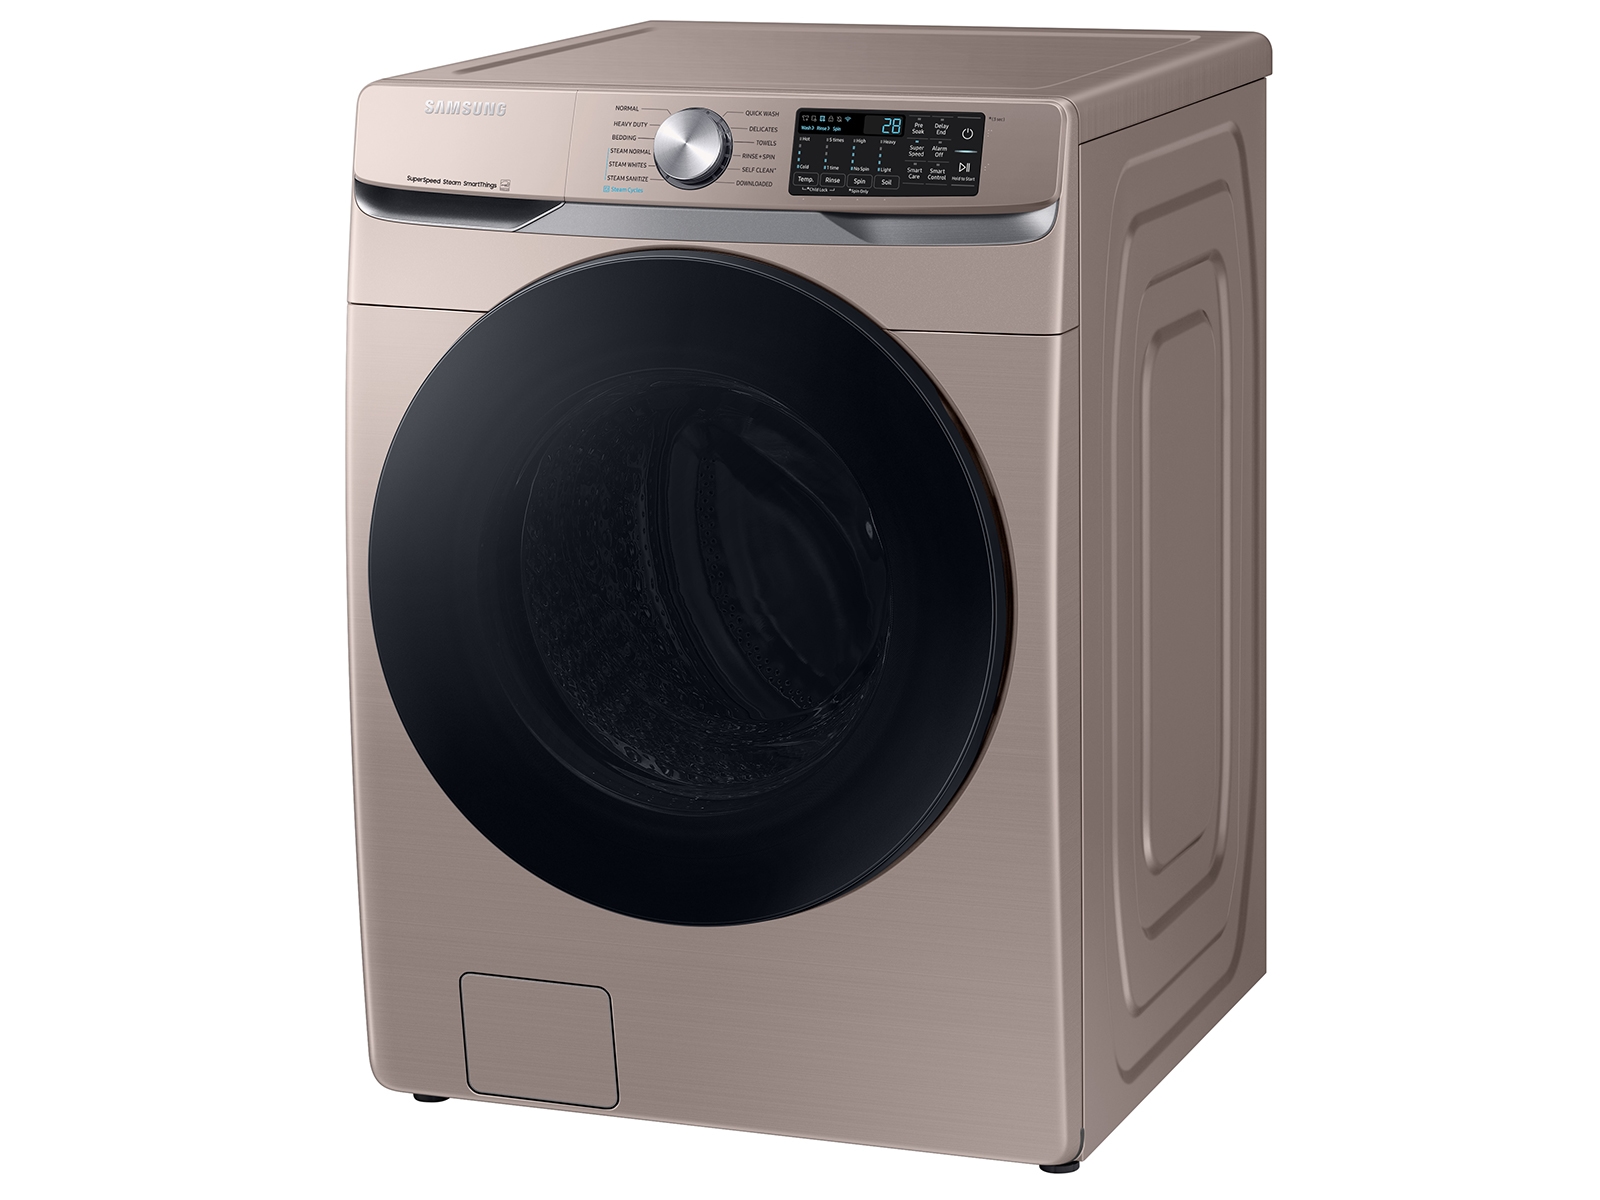 Samsung WF45B6300AW 27 Inch Smart Front Load Washer with 4.5 Cu. Ft.  Capacity, 10 Washing Cycles, Steam Cycle, Sanitize, Quick Wash, Self  Clean+, Super Speed Wash, ADA Compliant, and Energy Star® Rated: White